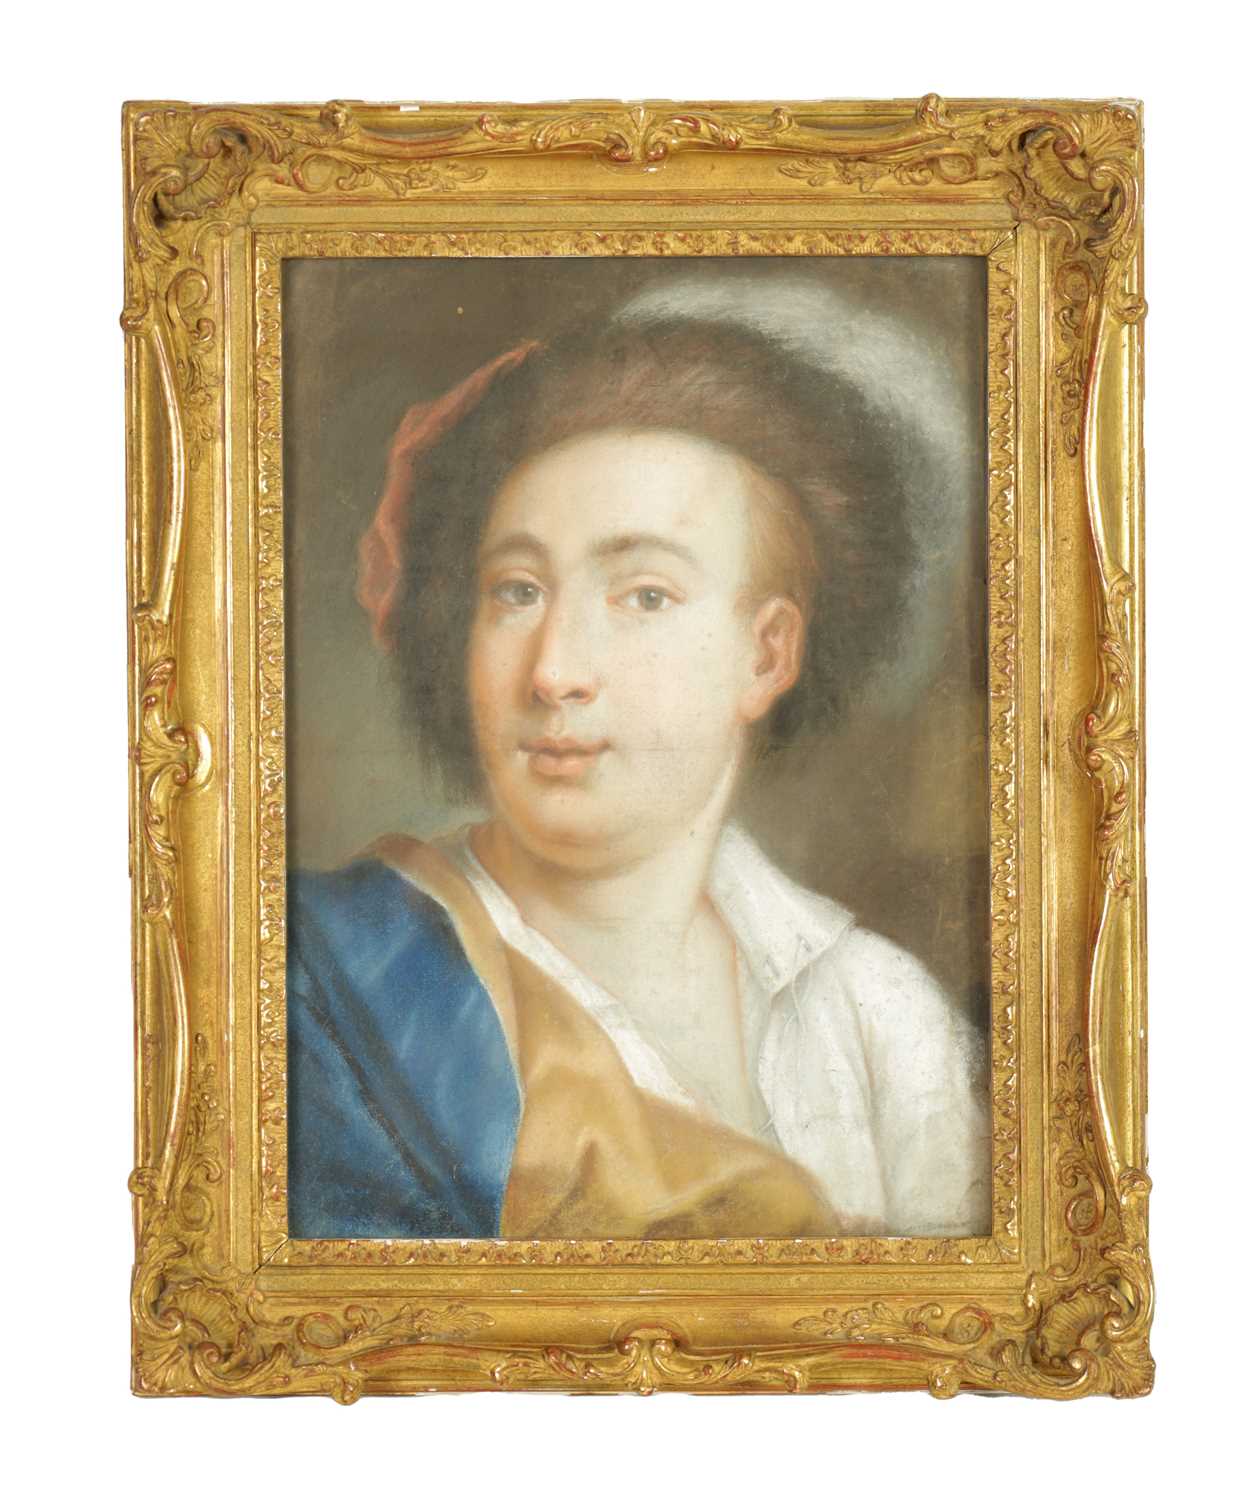 AN EARLY 18TH CENTURY PASTEL PORTRAIT OF A GENTLEMAN